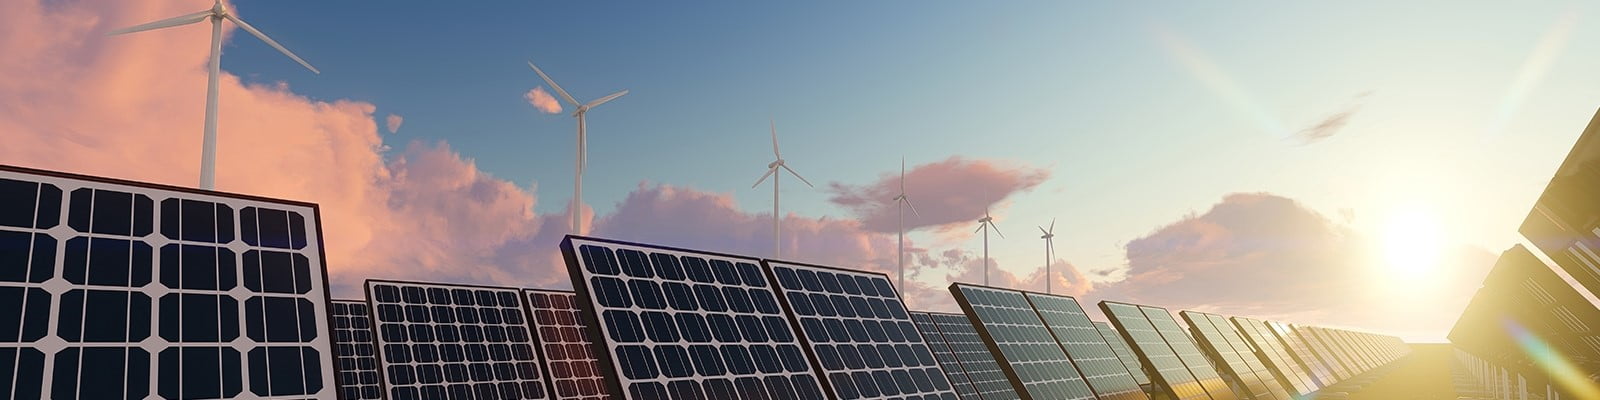 Renewable Energy Offers a Bright Future for Investors